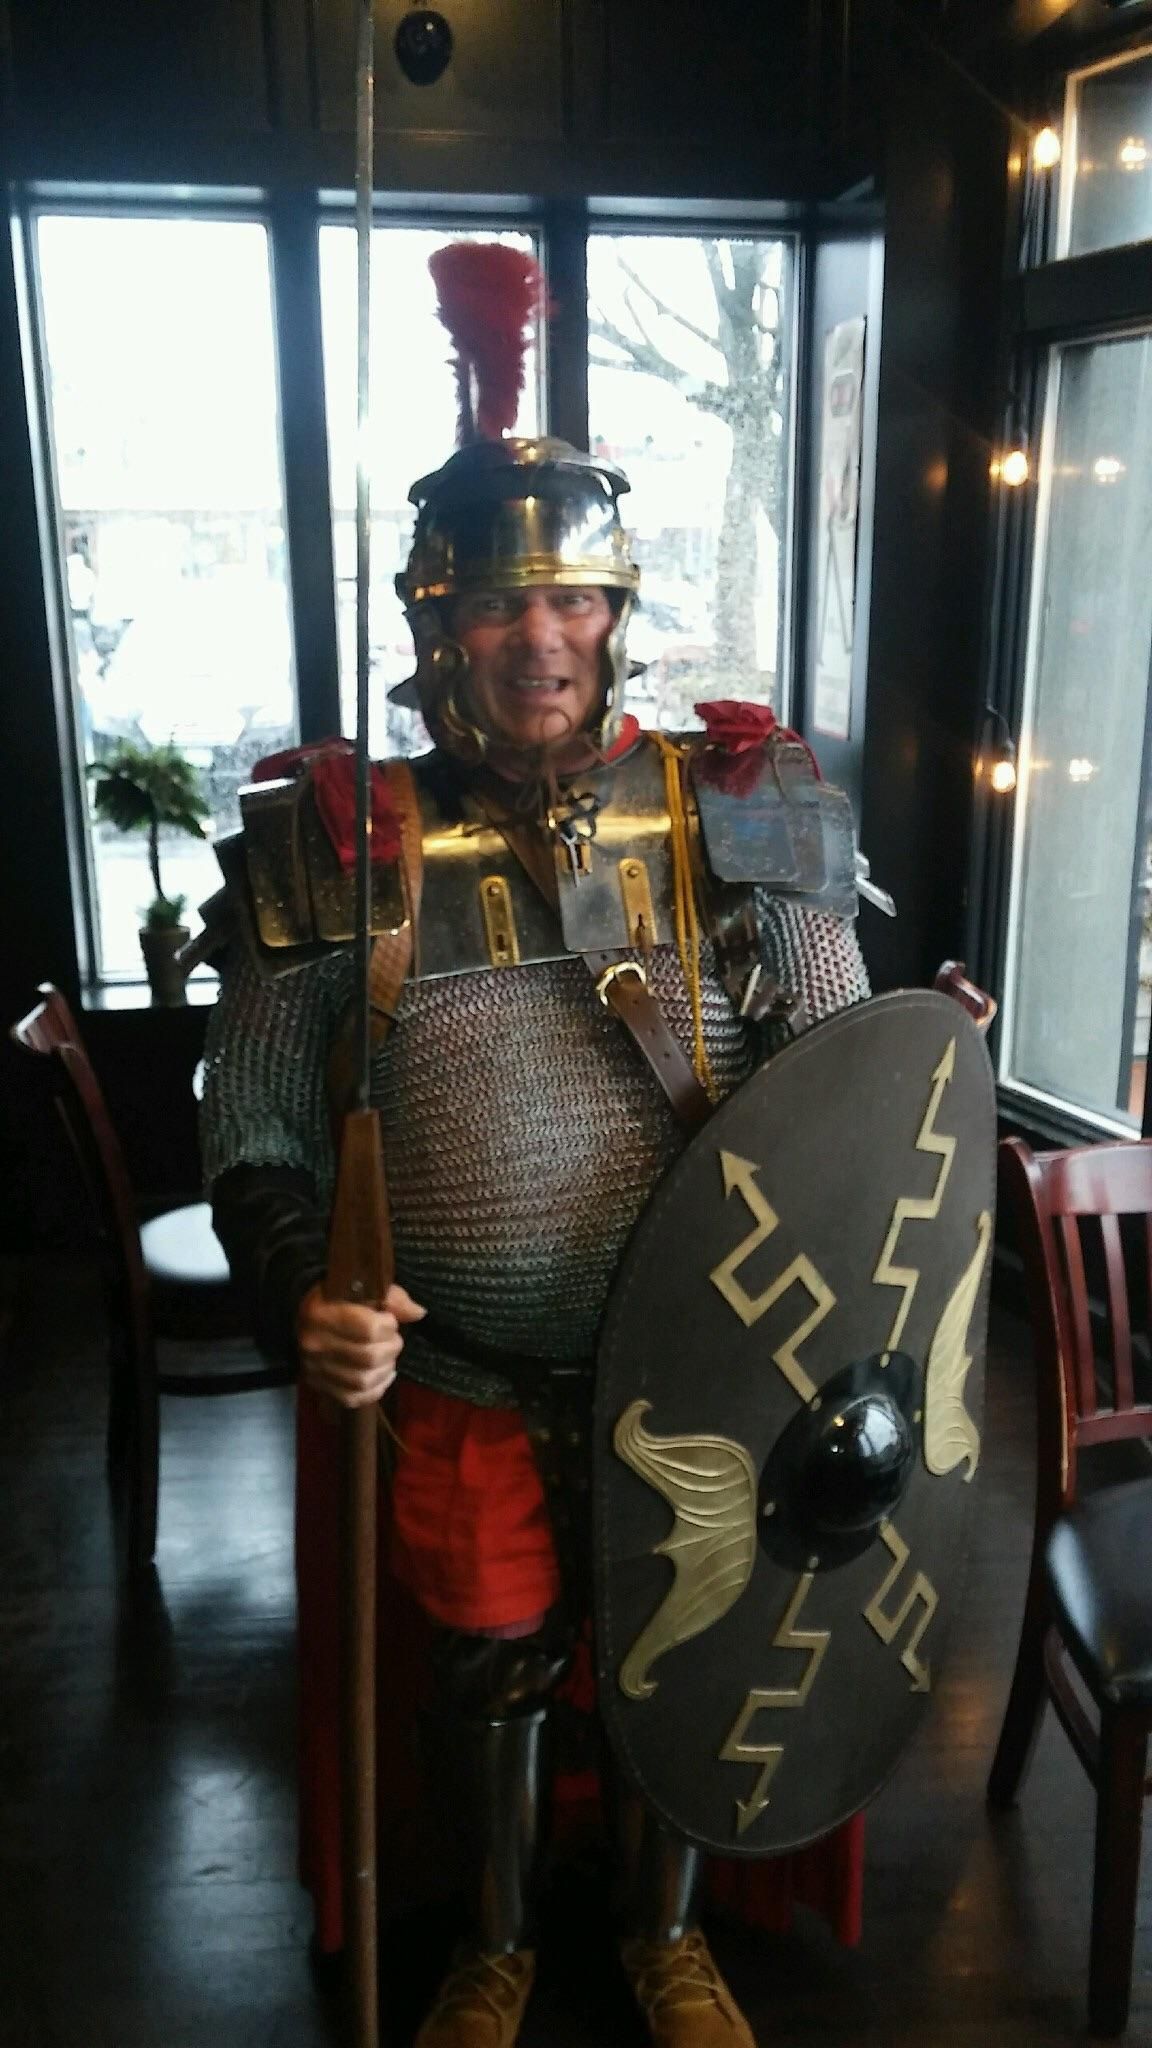 Every year on good Friday this man comes into our Bar dressed up as a Roman soldier